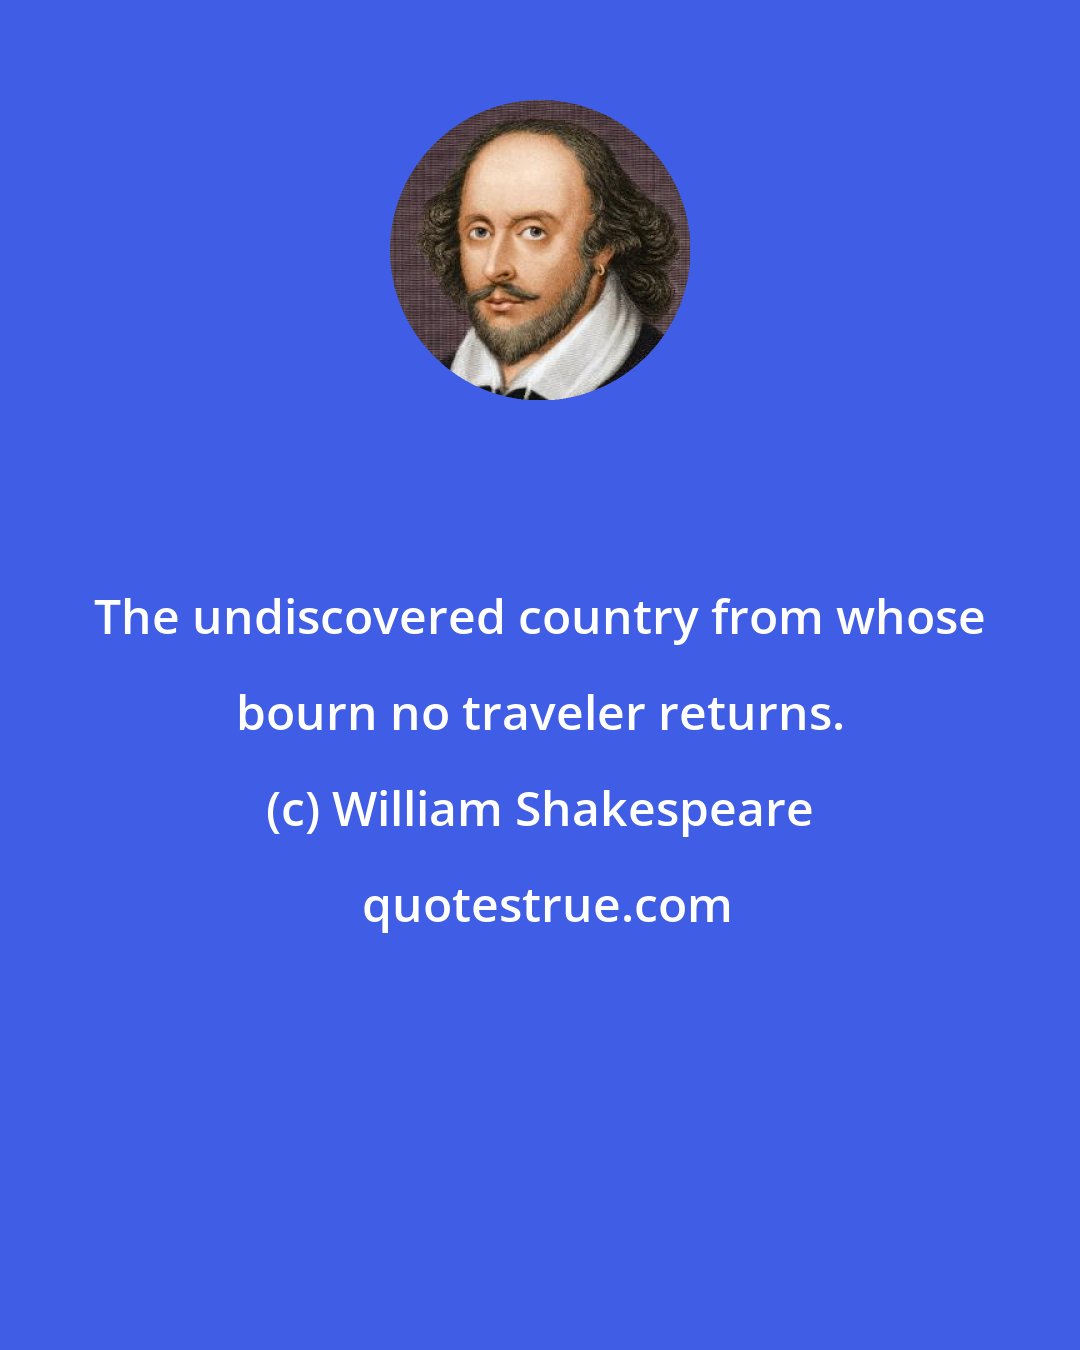 William Shakespeare: The undiscovered country from whose bourn no traveler returns.